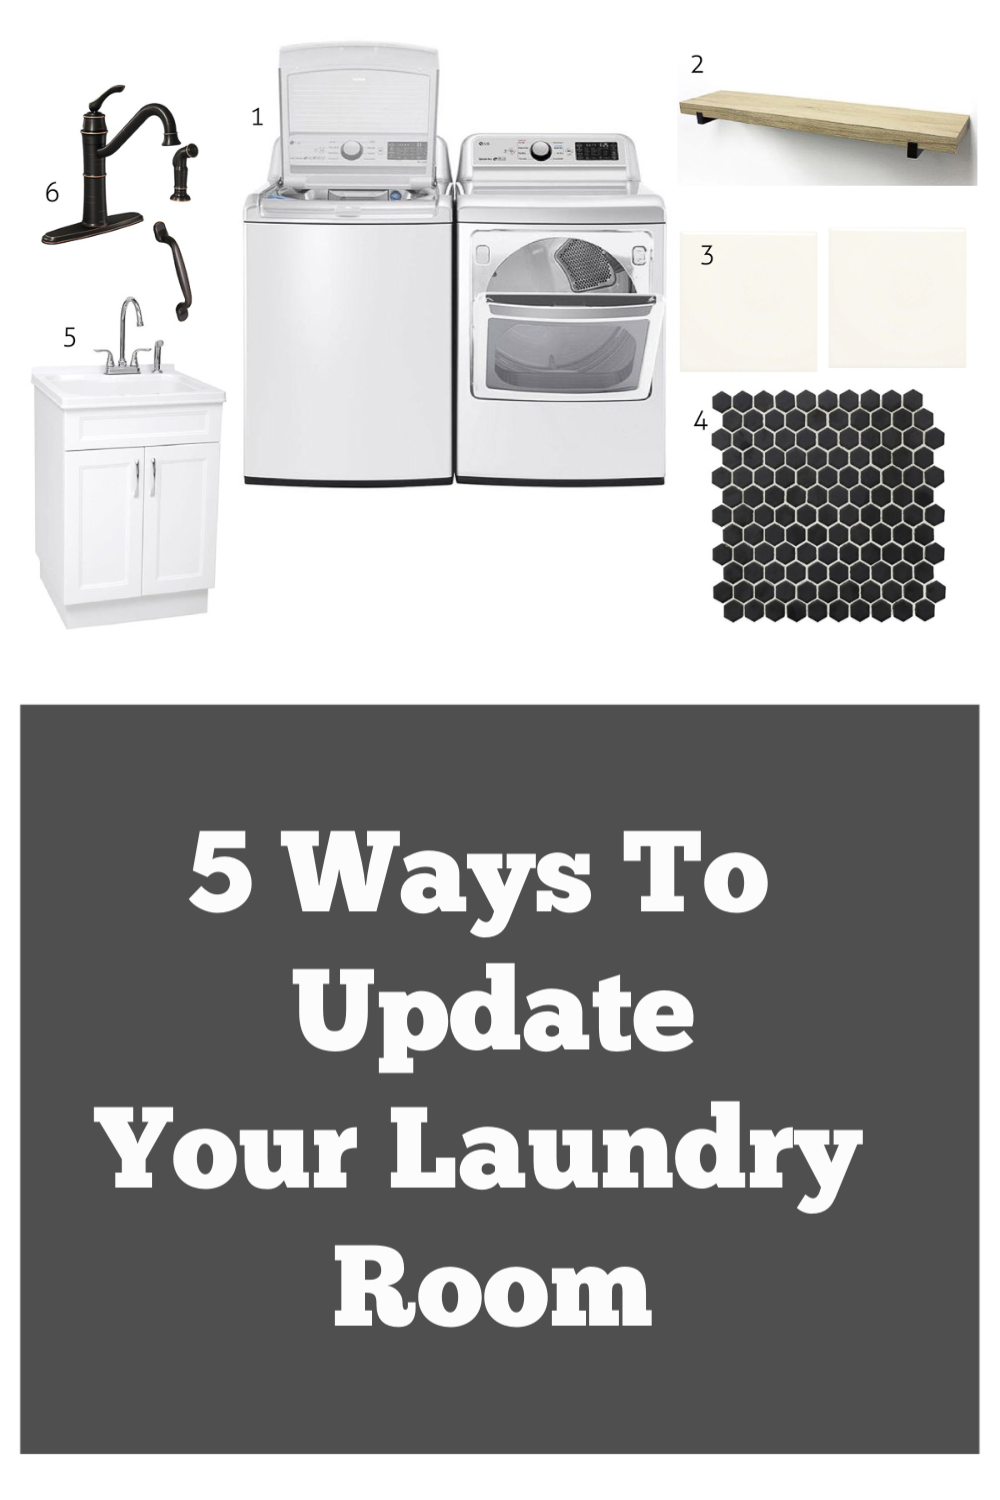 5 Ways to Update Your laundry room with my one stop shop Lowe's Home Improvement and upgrading my appliances for easier and faster wash with LG Appliances. #lowespartner #laundryroom #sponsored #homeimprovementtips laundry room 